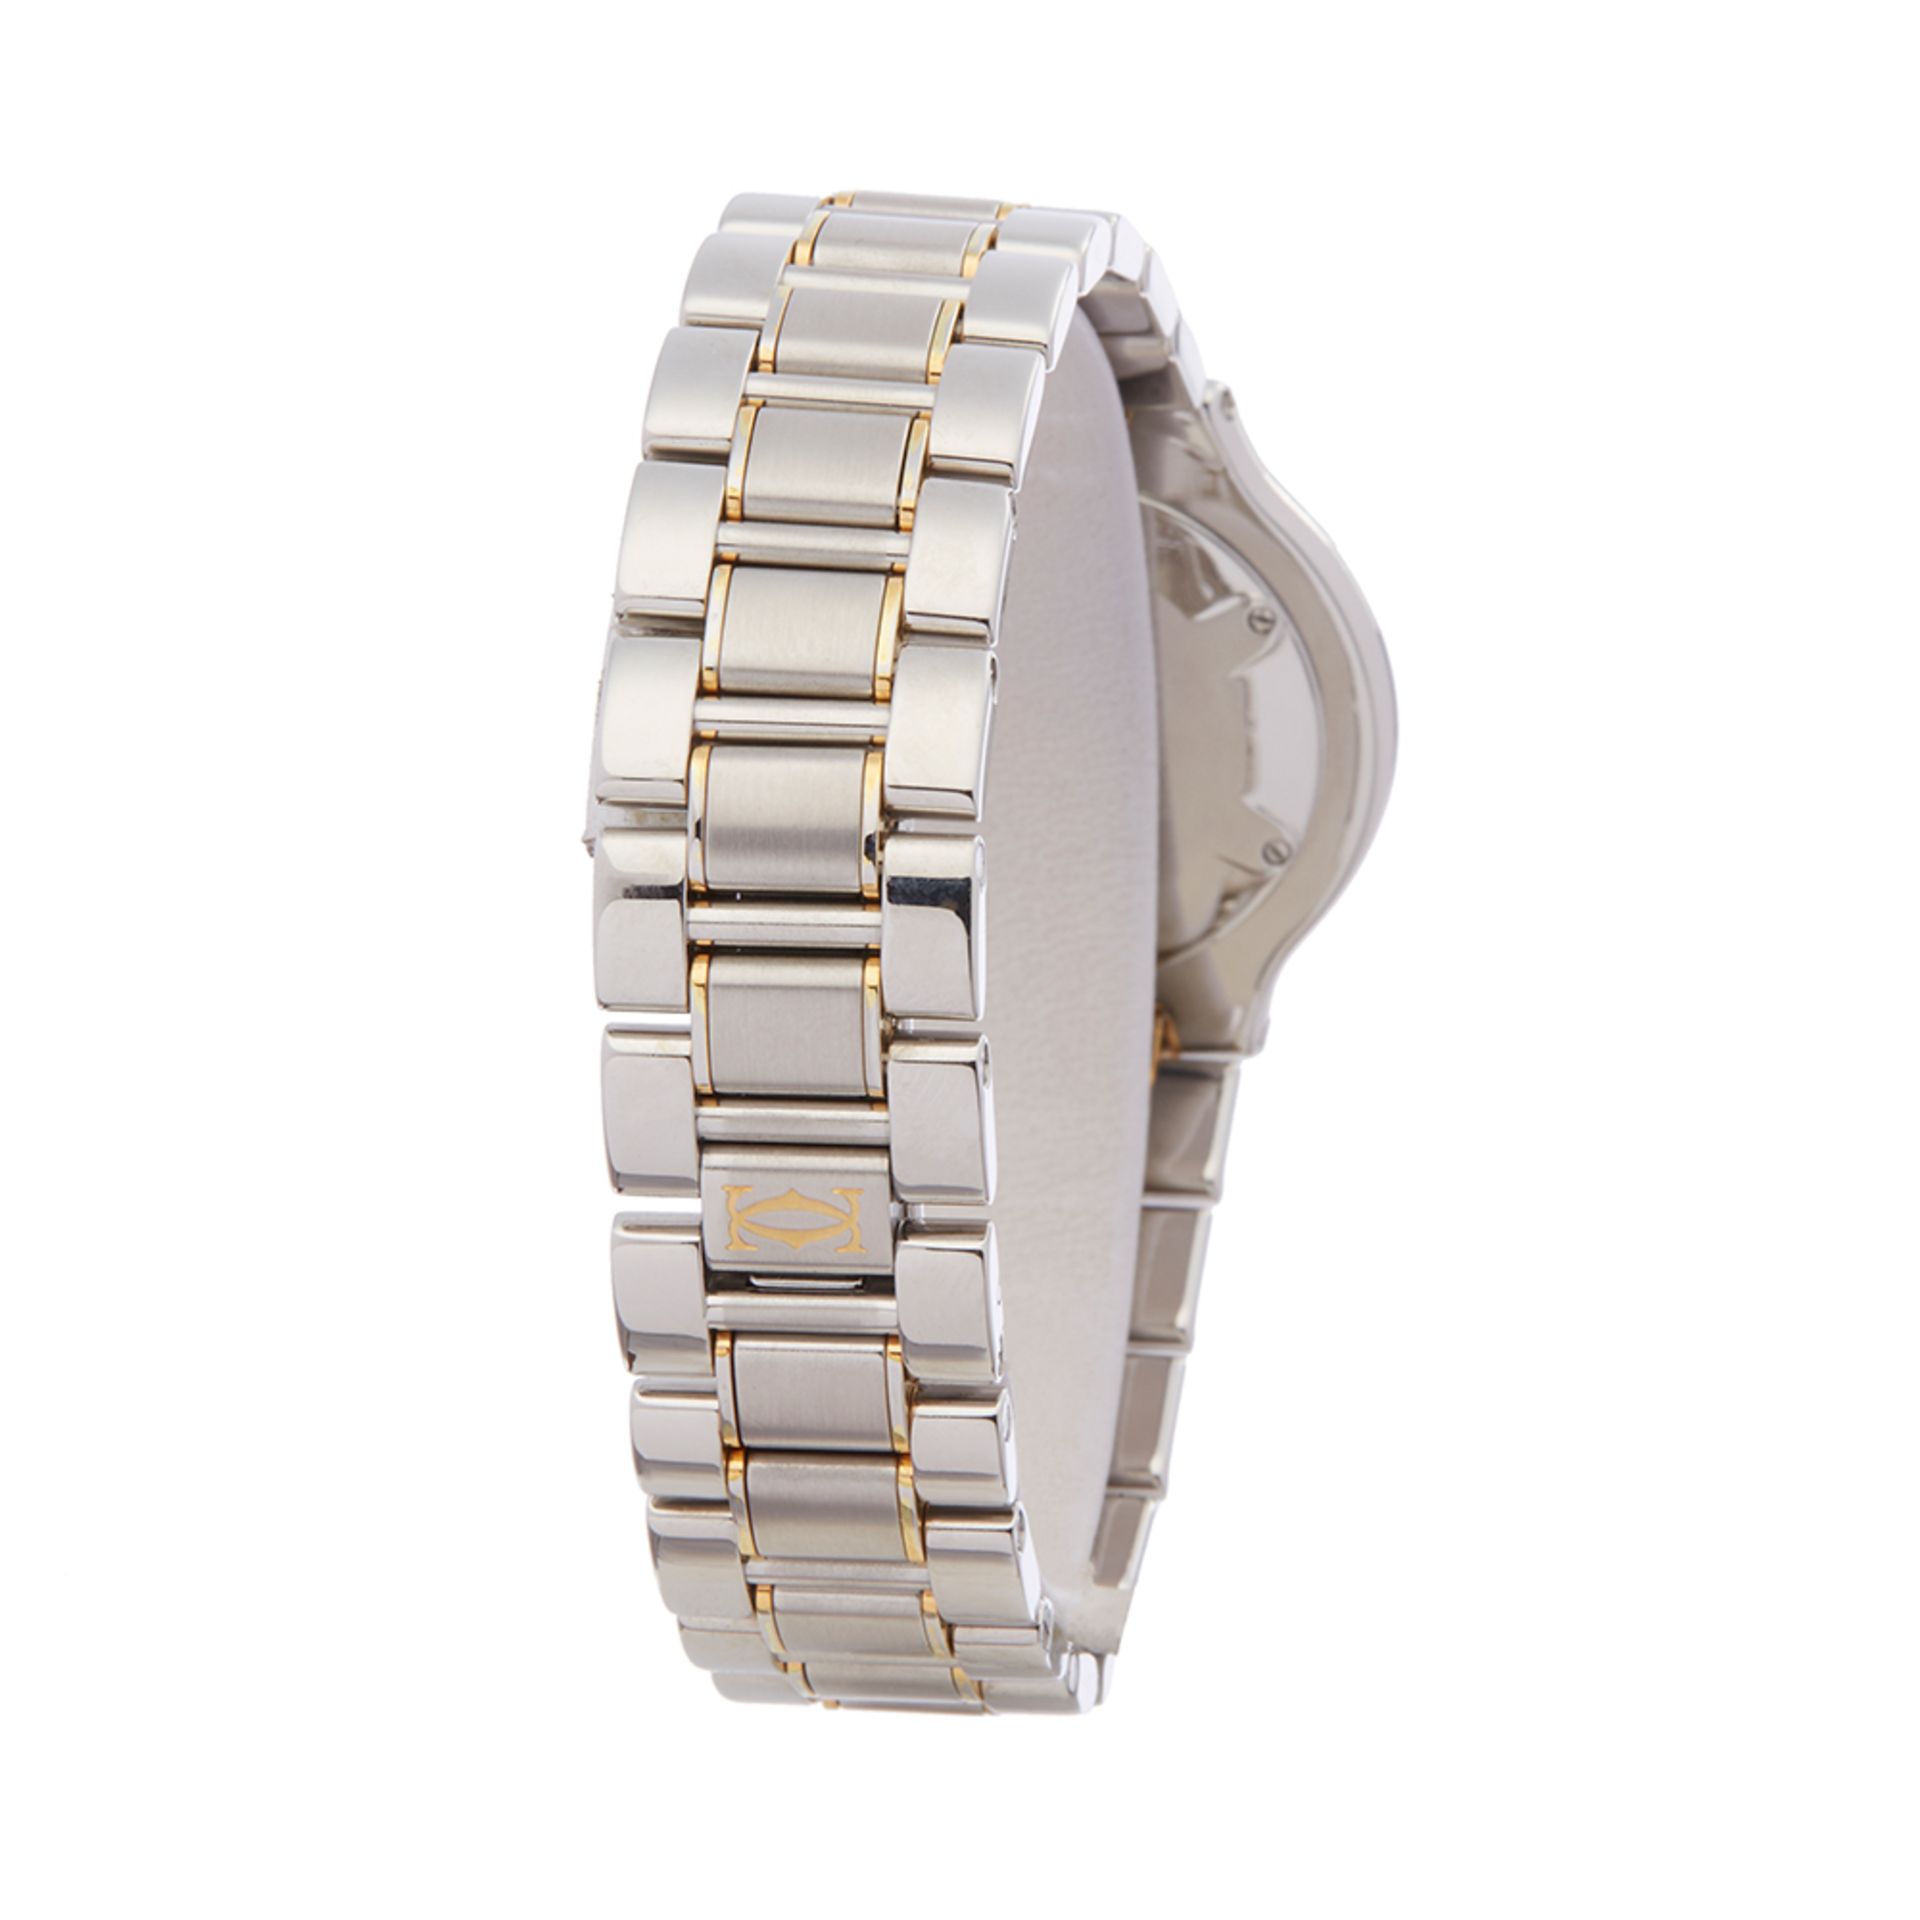 Cartier Must de 21 21 Stainless Steel & 18K Yellow Gold - W1007819 - Image 6 of 7